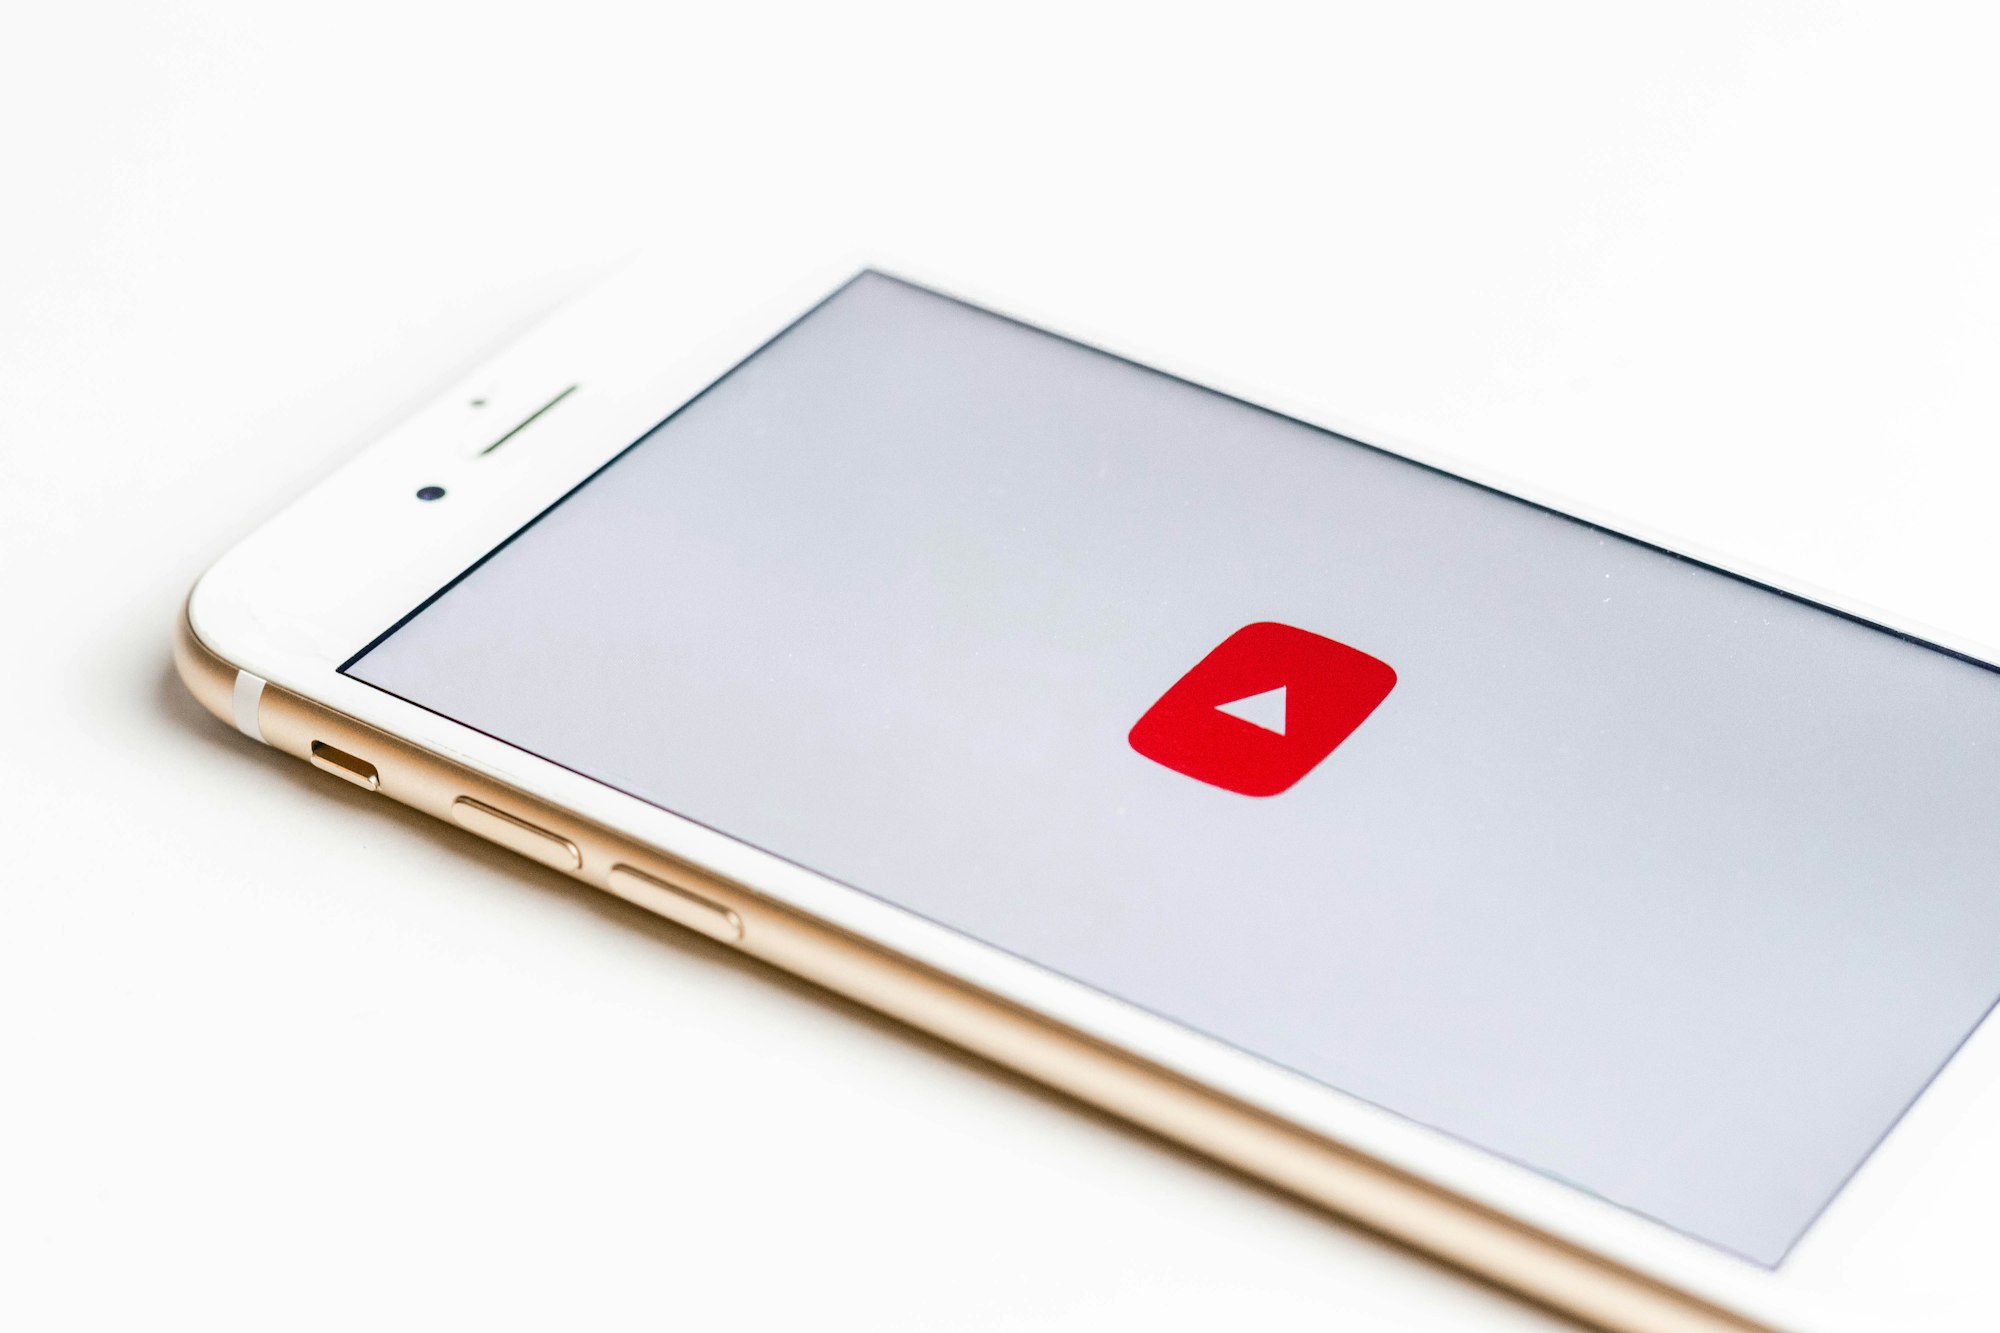 The Top YouTube Playlists to Land On